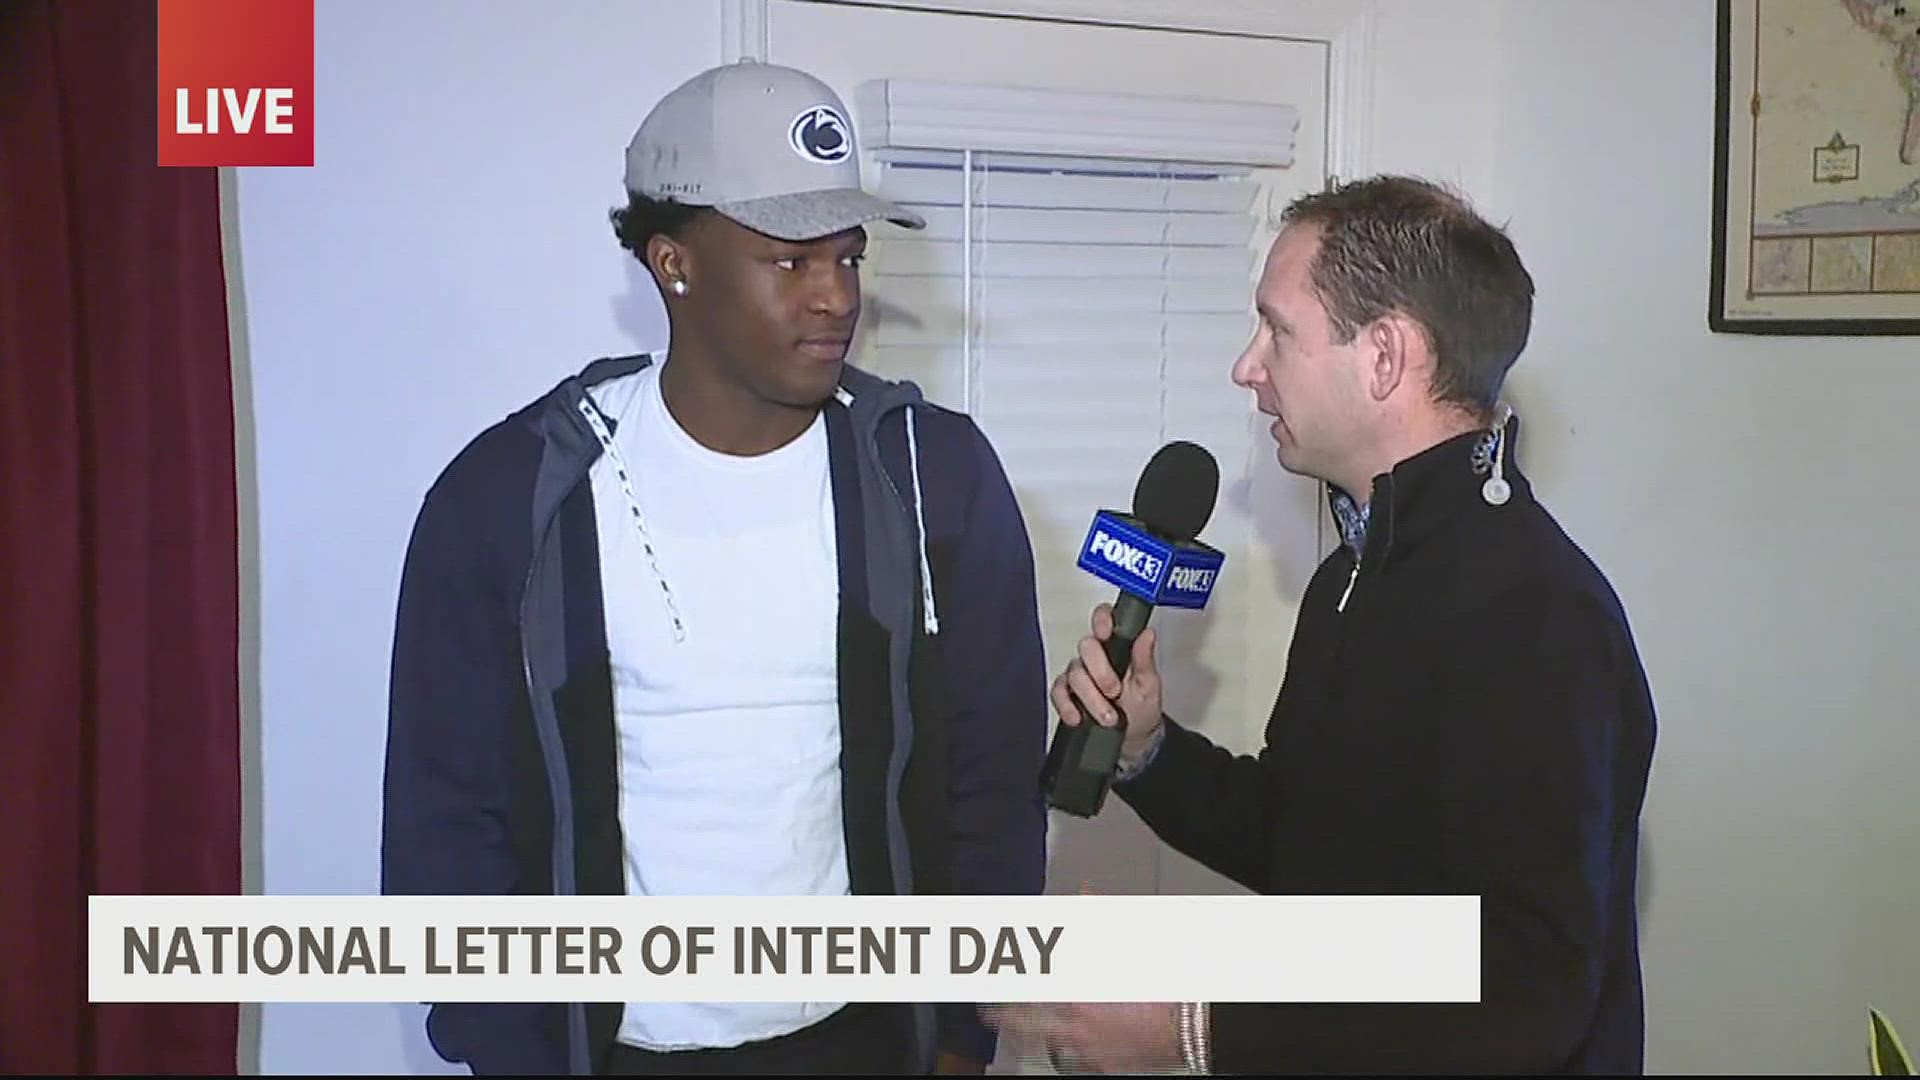 FOX43's Andrew Kalista was live in Manheim Township as wide receiver Anthony Ivey signed his commitment to play at Penn State University.